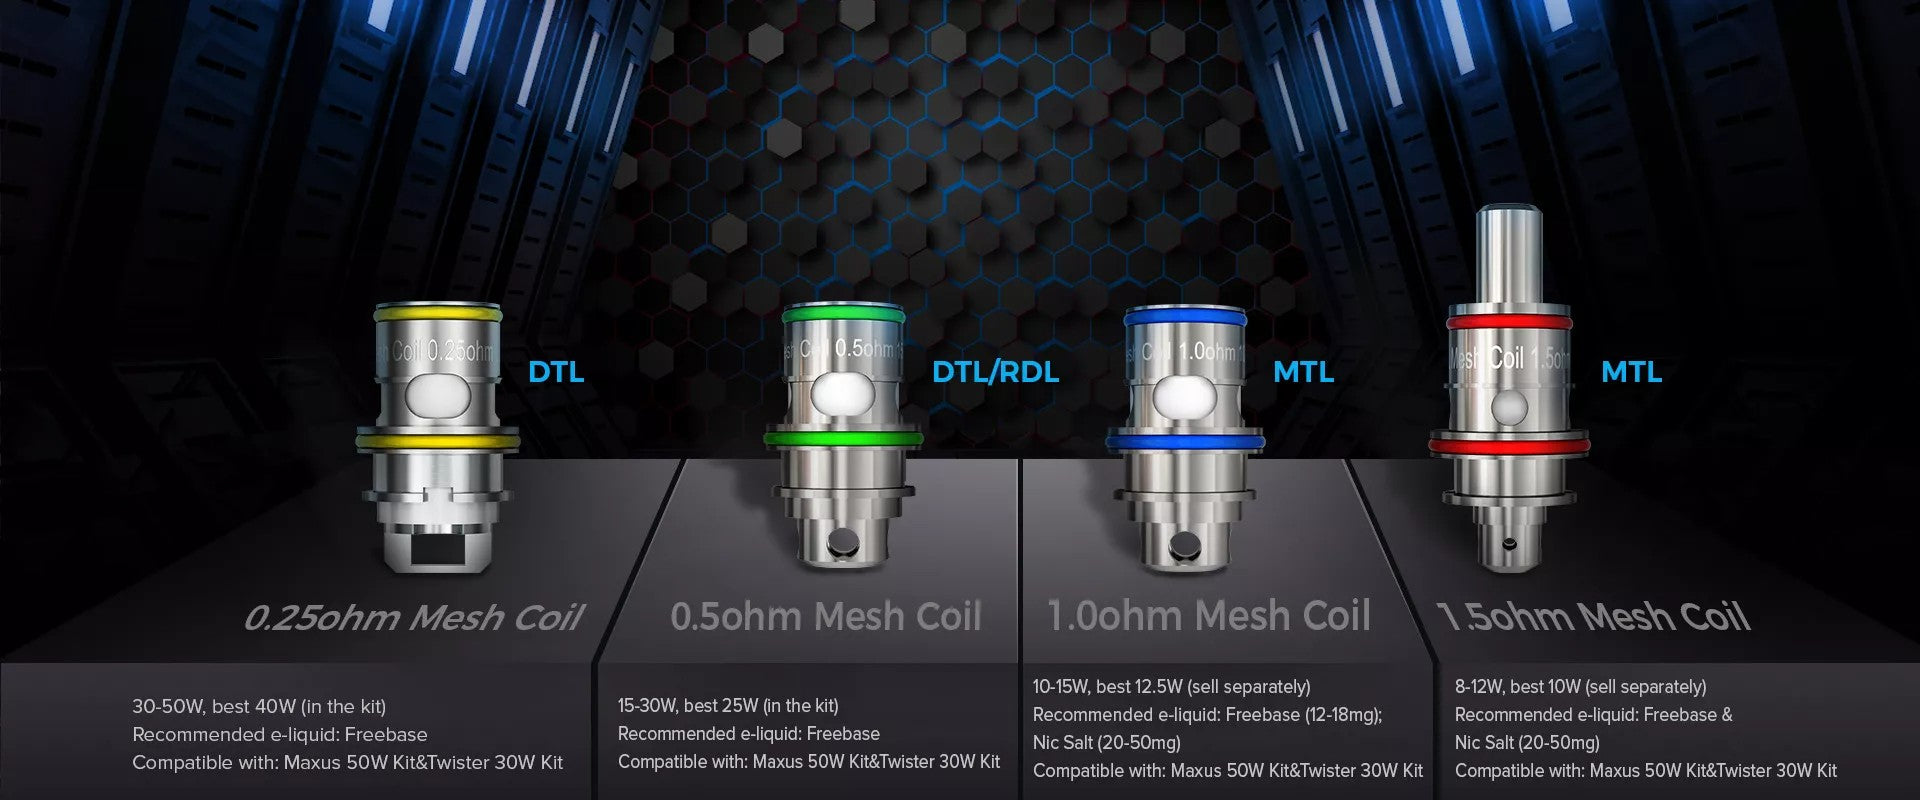 Coil options include both DTL and MTL versions